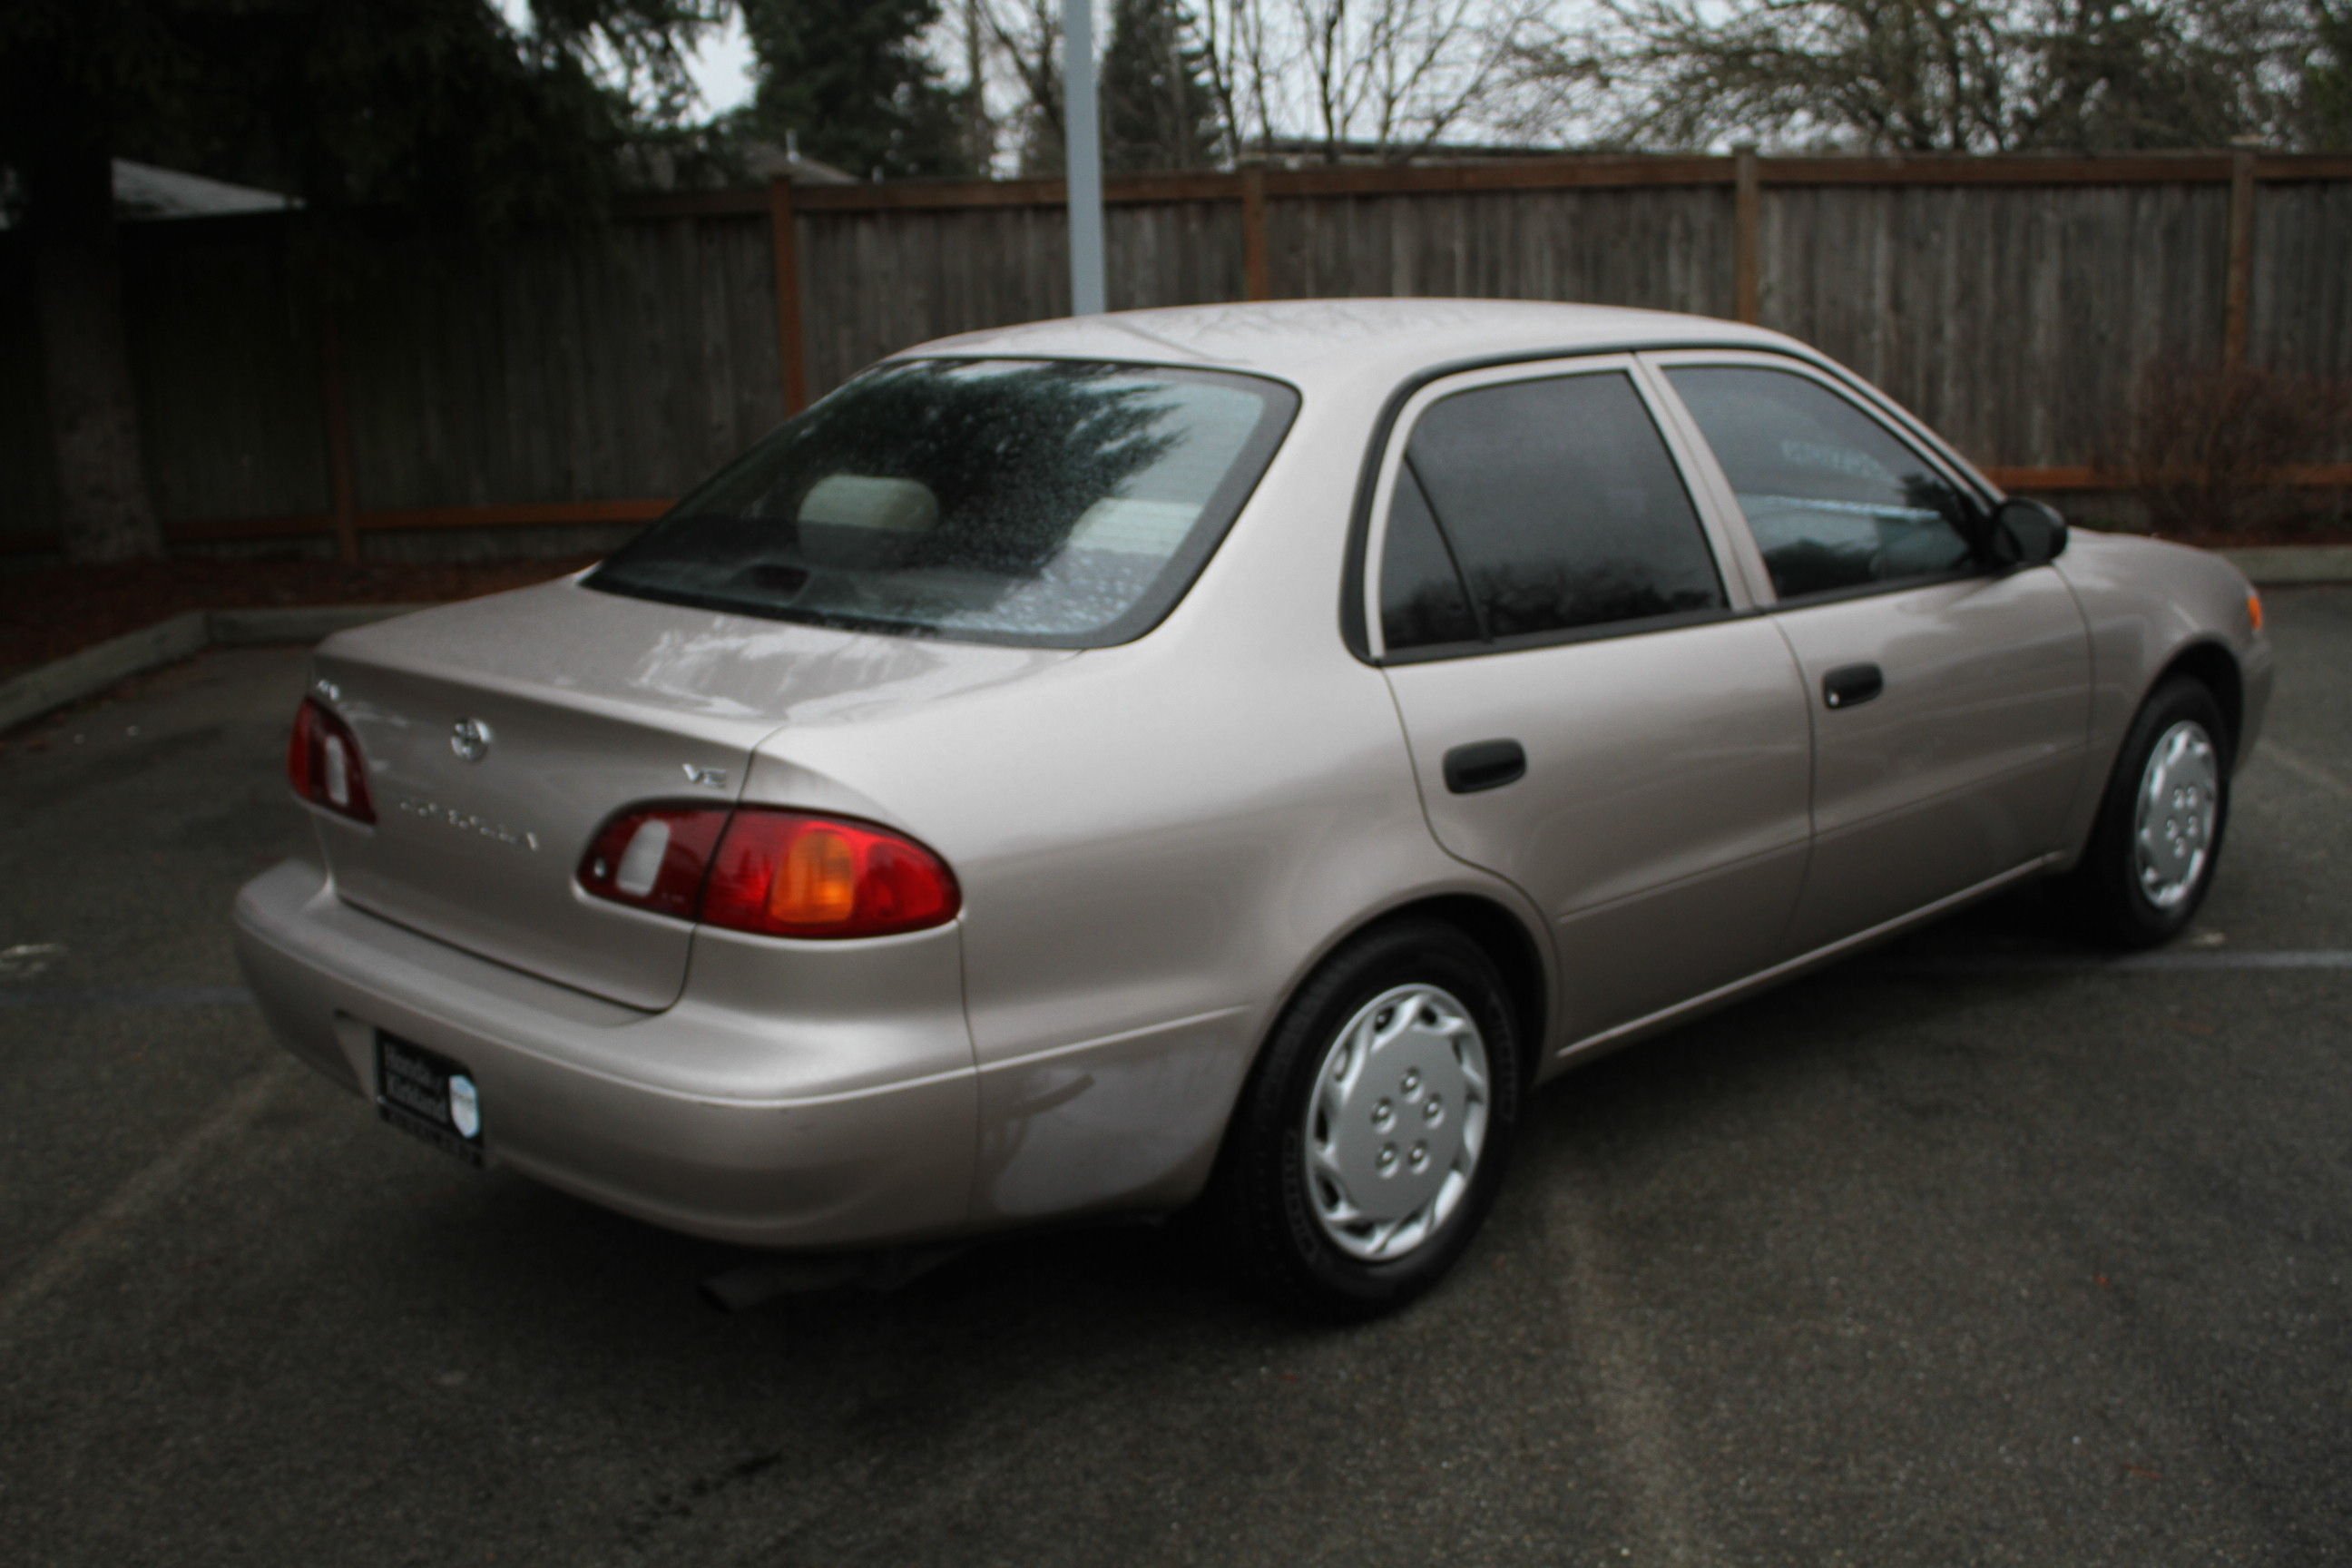 PreOwned 2000 Toyota Corolla LE 4dr Car in Kirkland